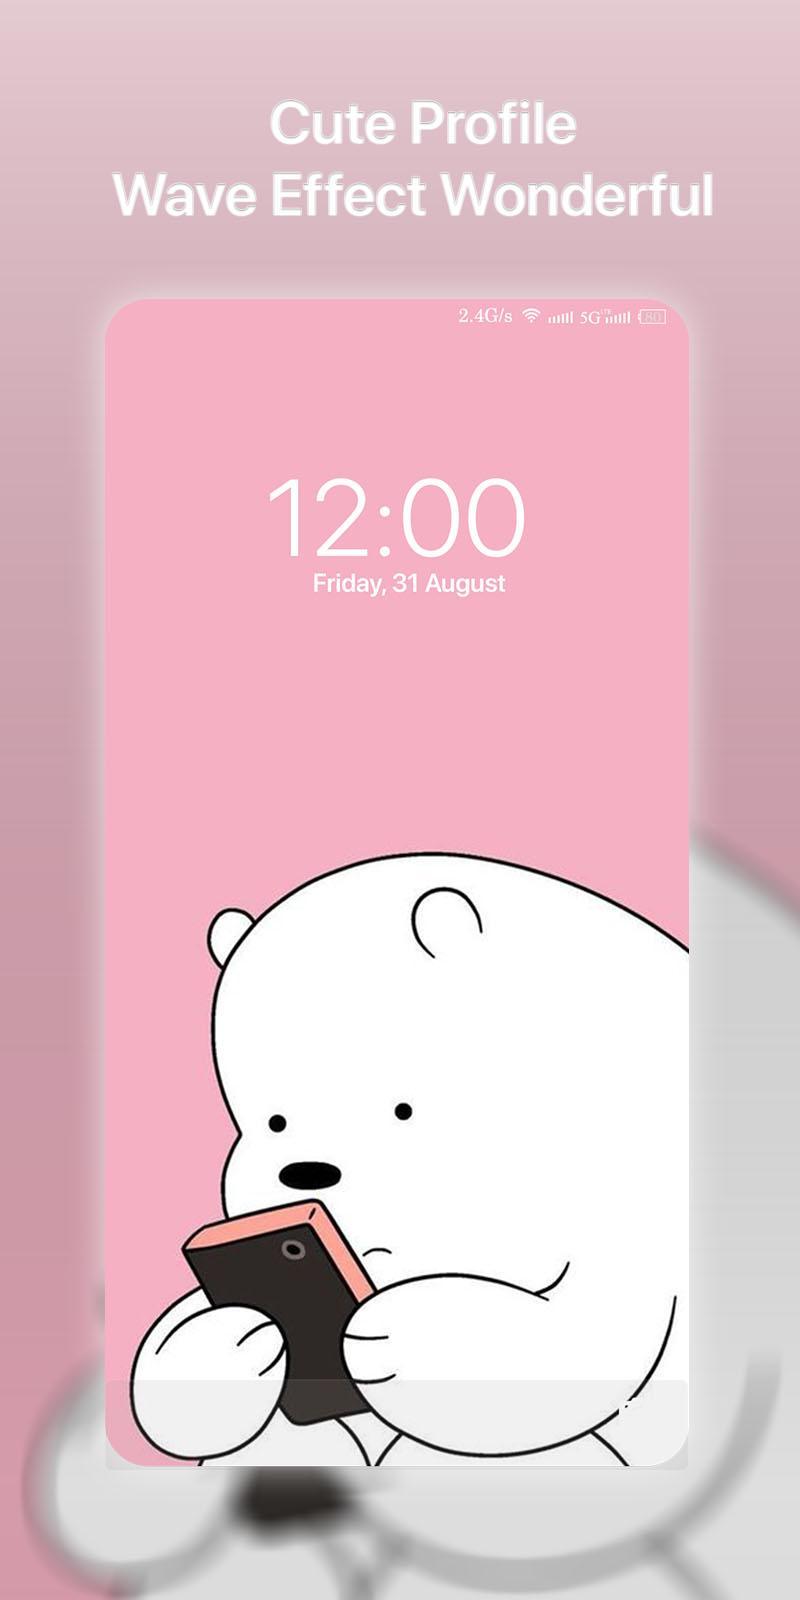 Cute Profile Live Wallpaper 4K for Android